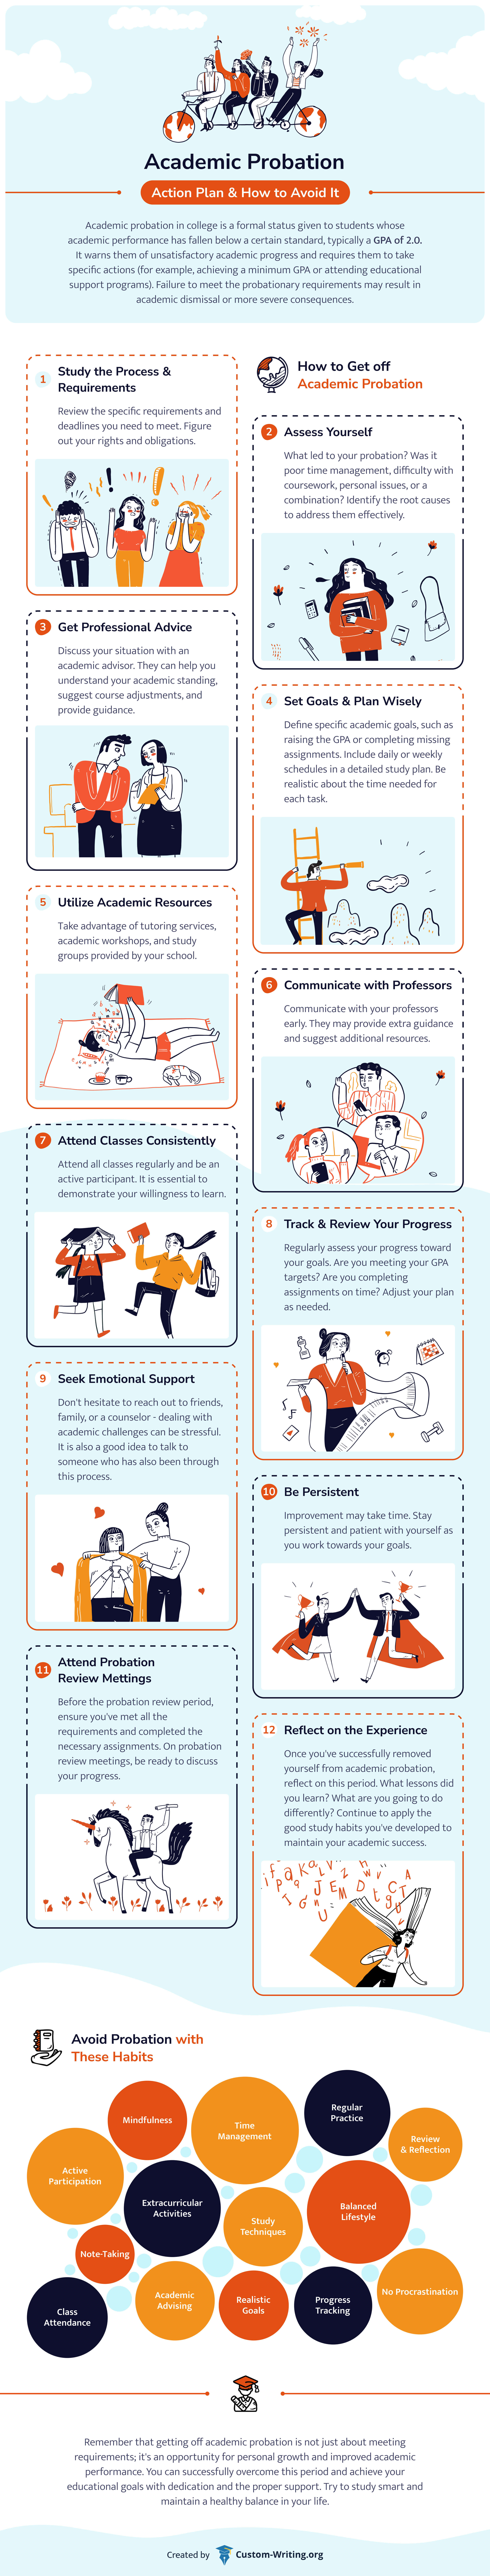 The infographic explains how to get off probation and which habits to implement to avoid it.